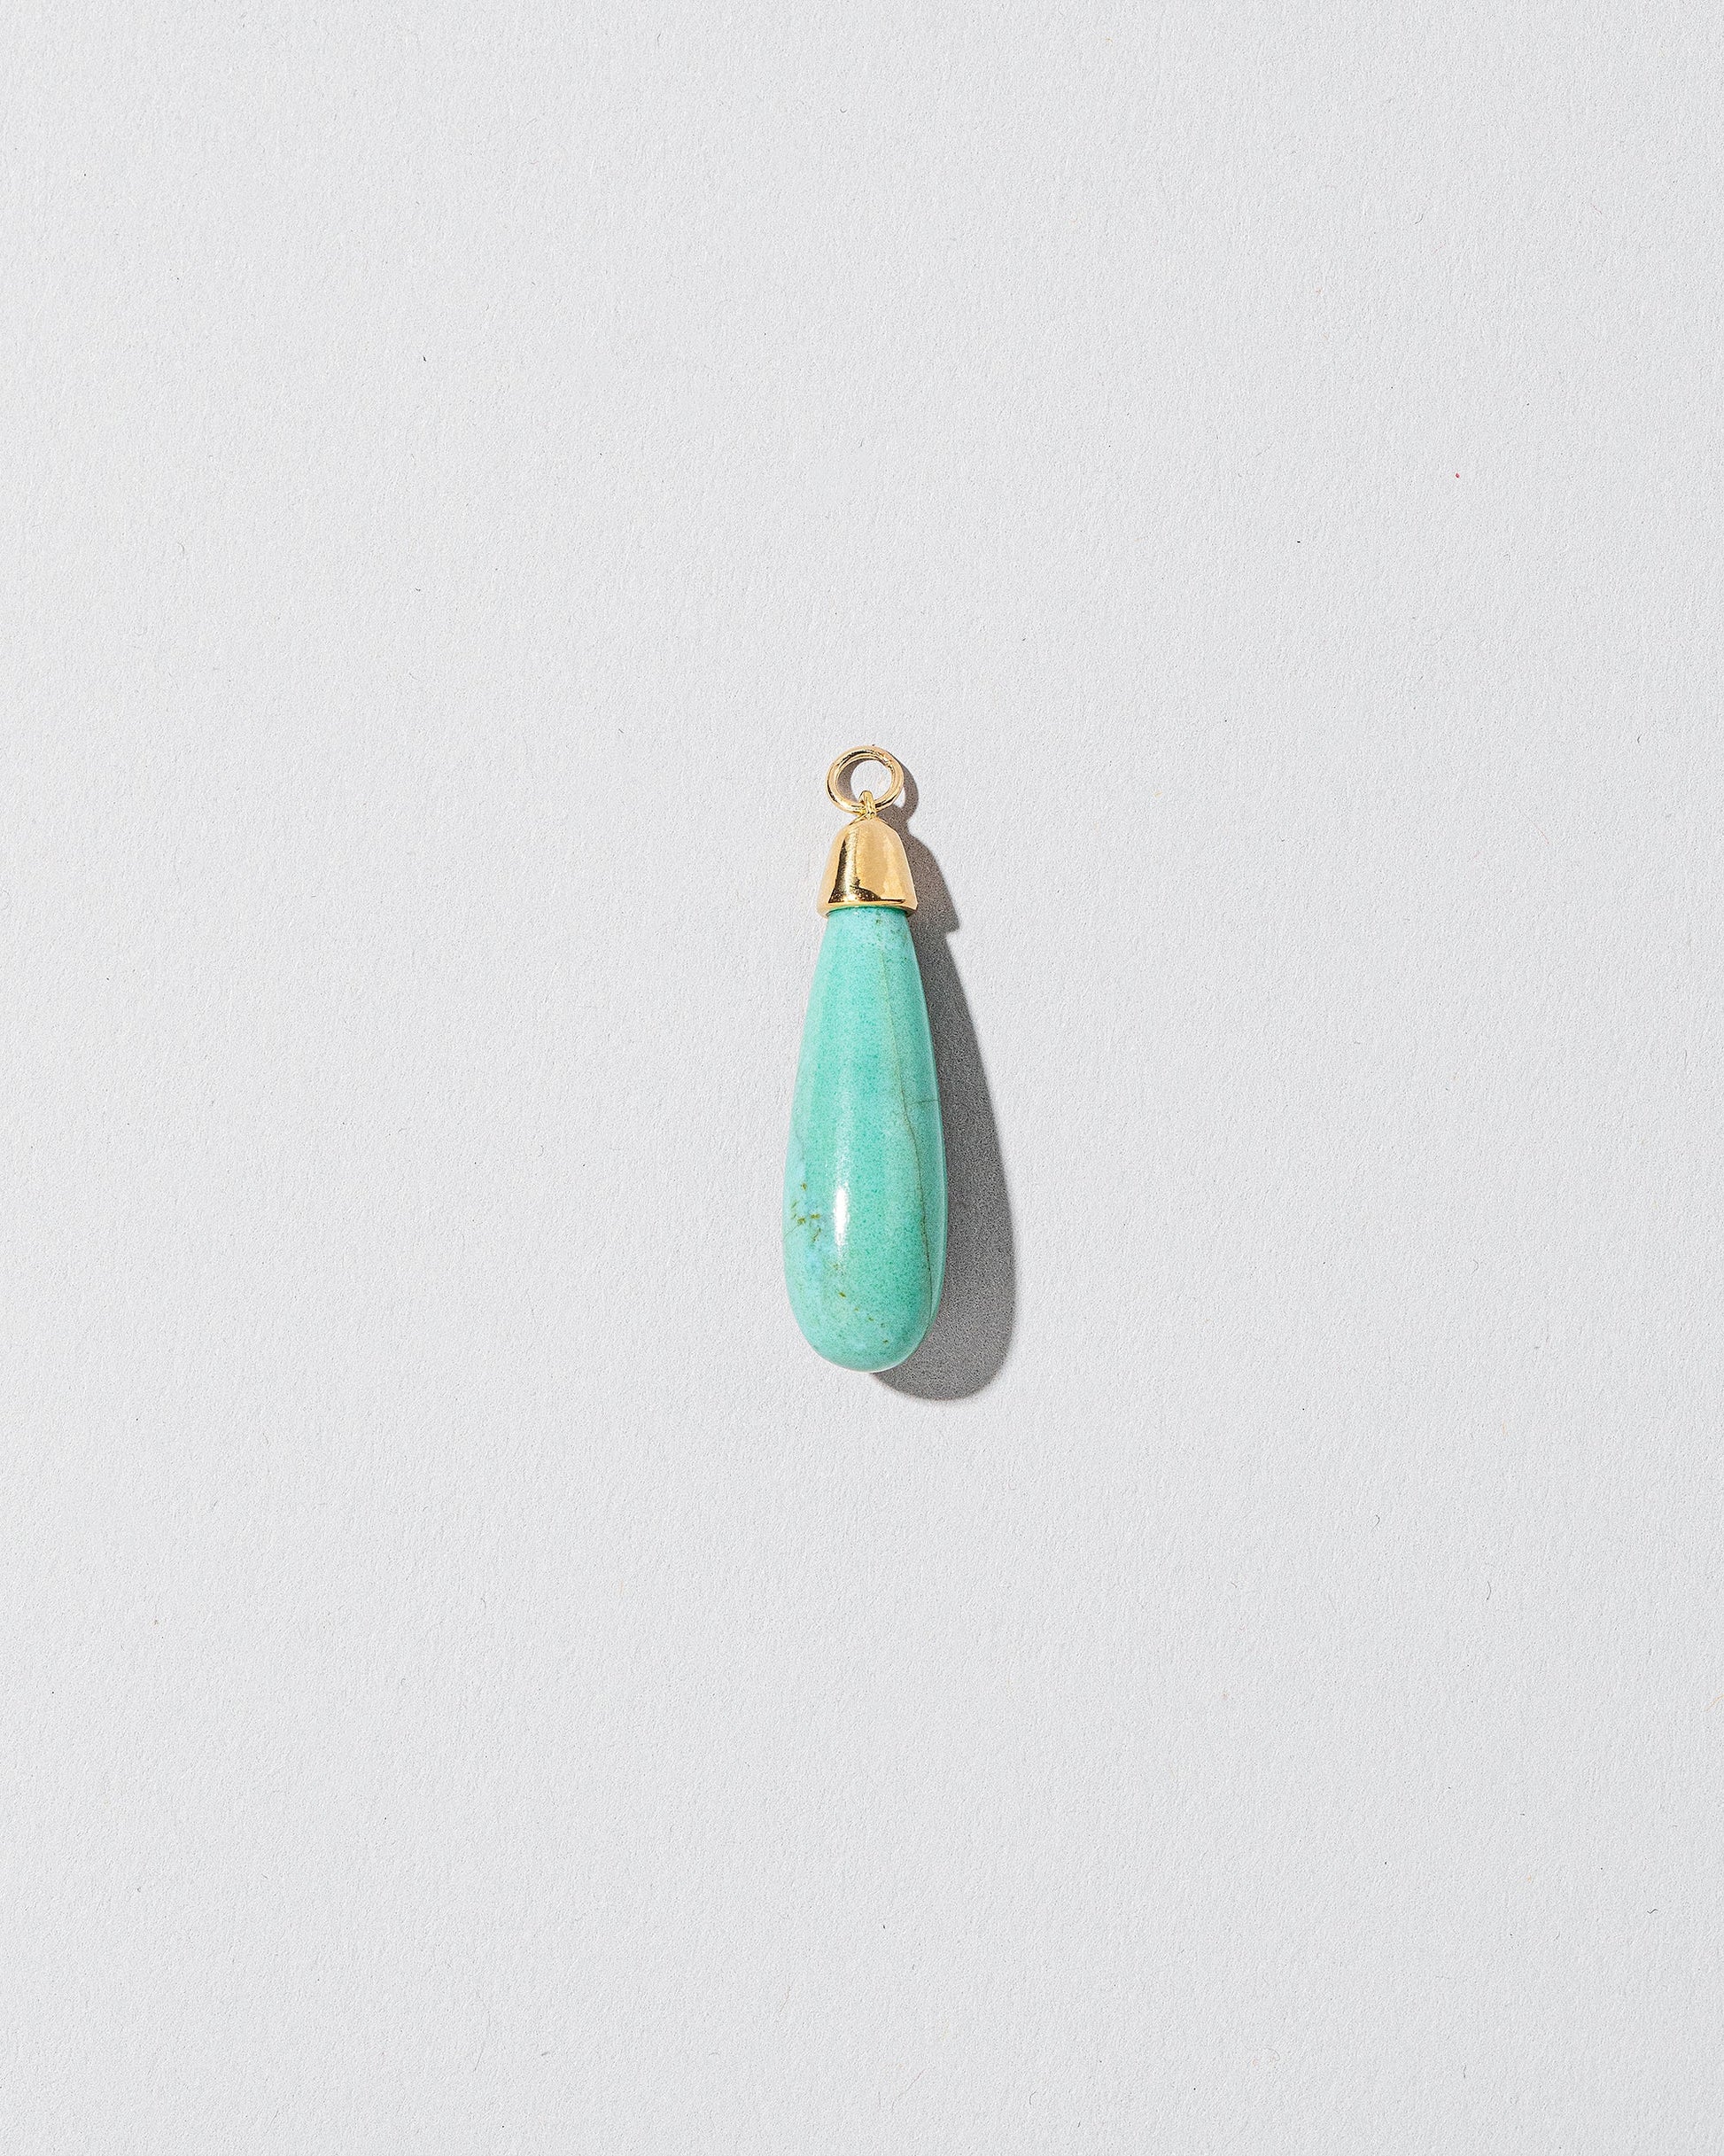  Turquoise Drop Pendant on light color background.